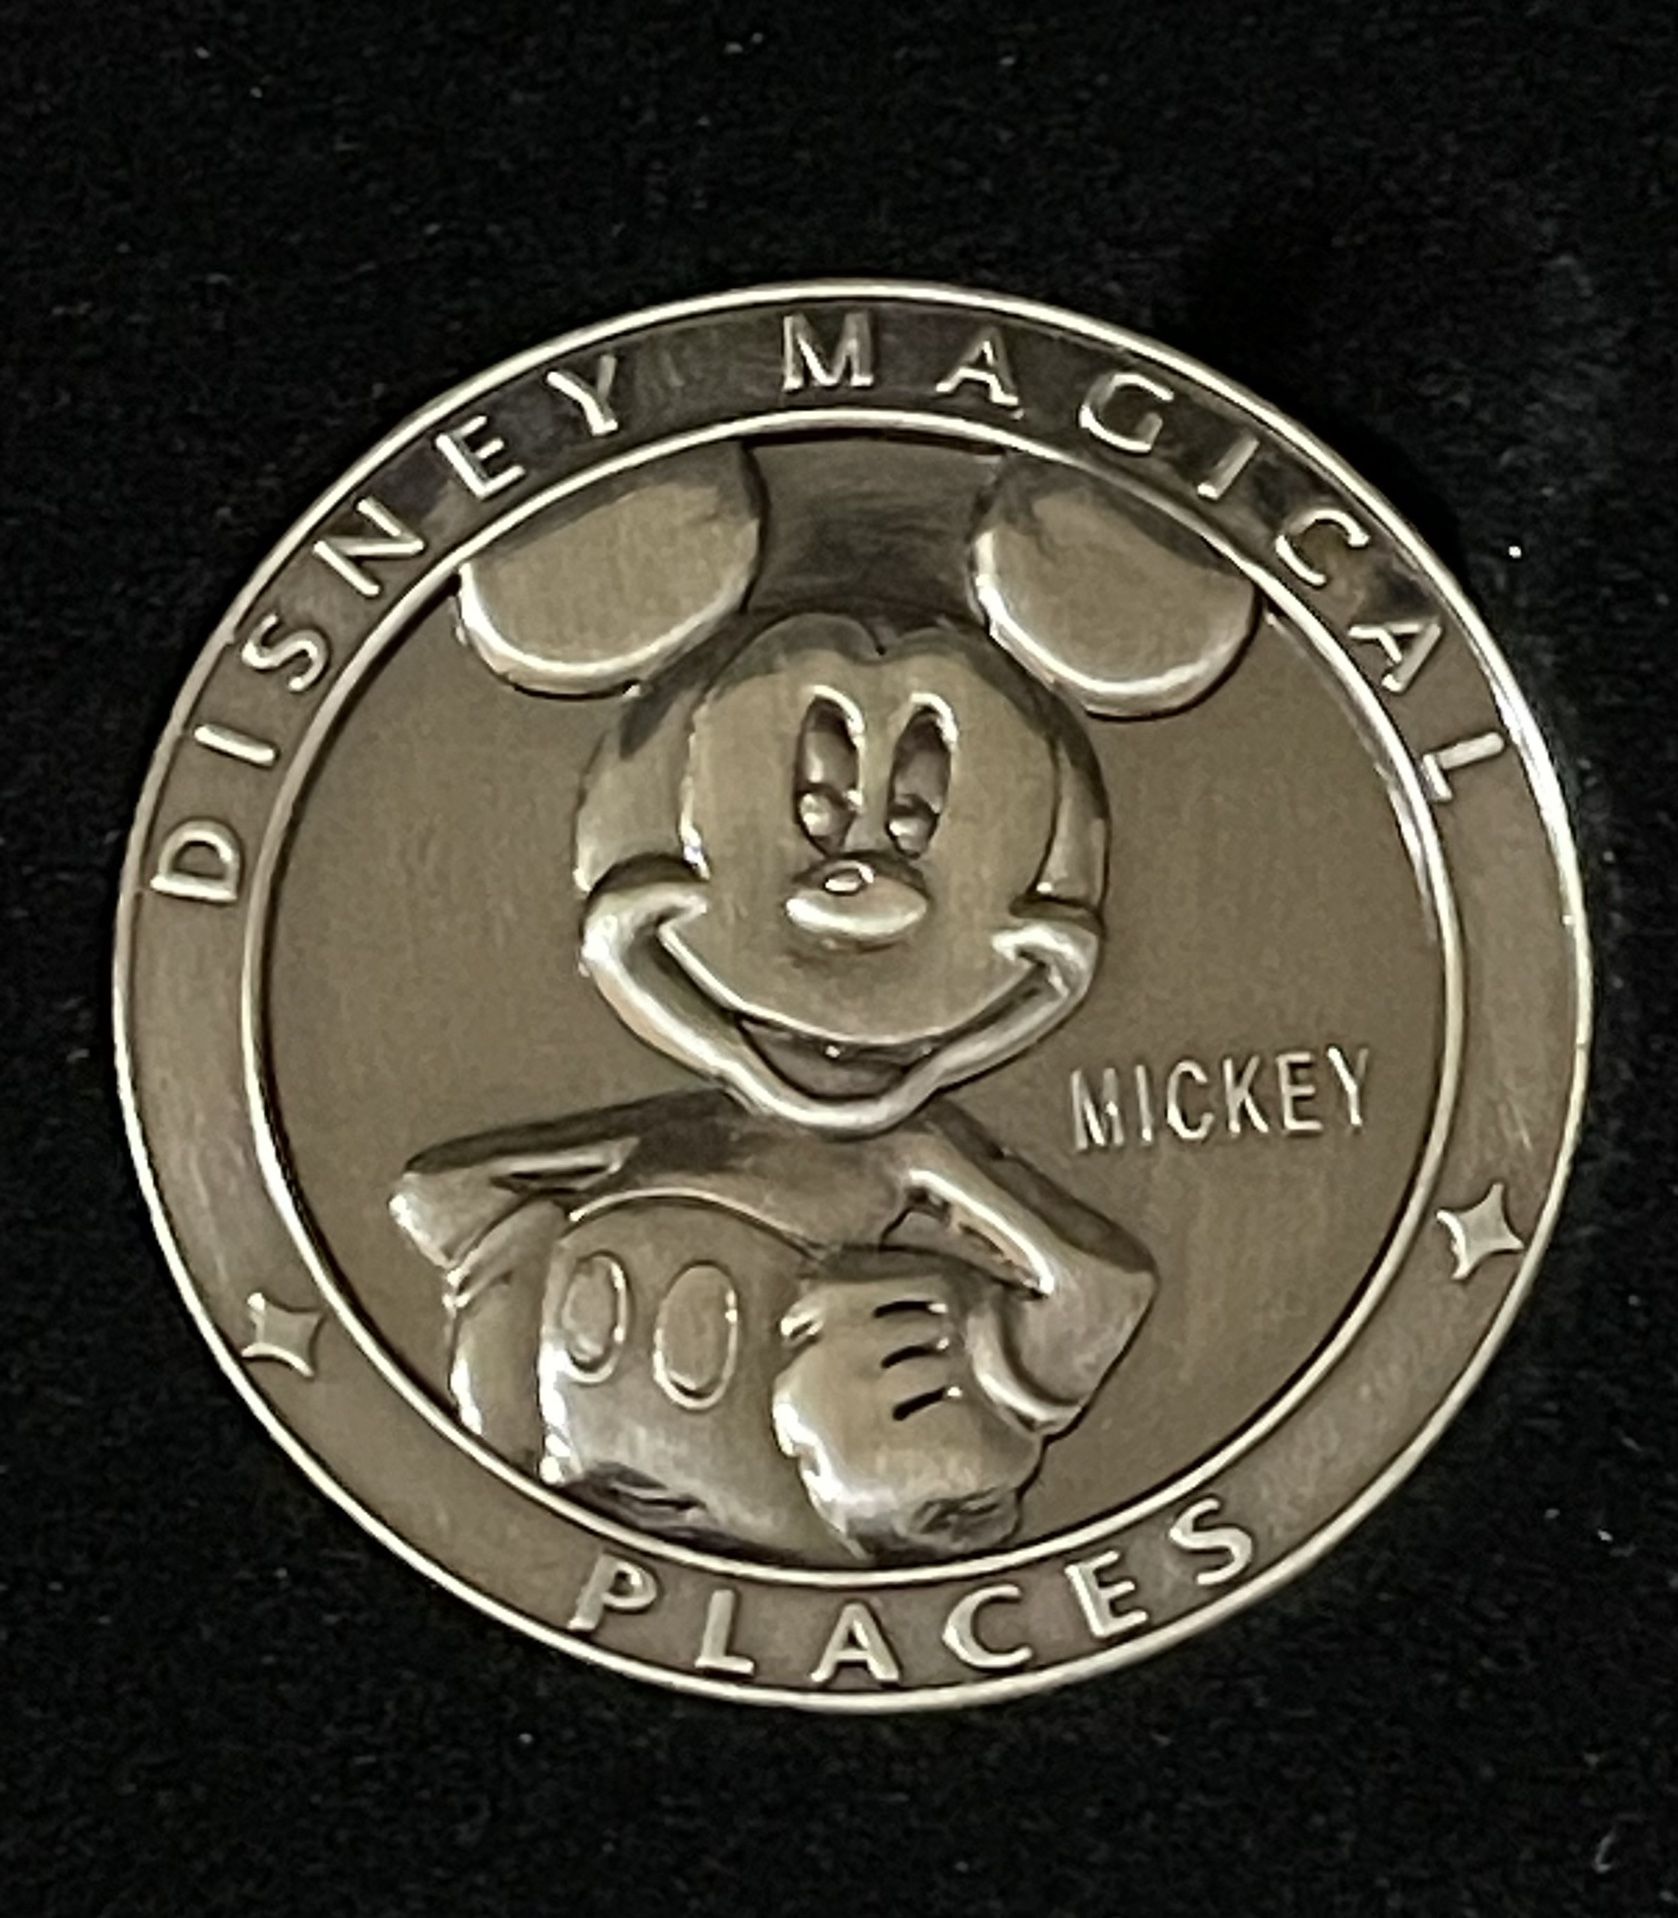 Disney Movie Reward Disney Magical Places Collector’s Coin. Brand New In Package With COA. . 4 Different Coins. Only $45.00 For All 4